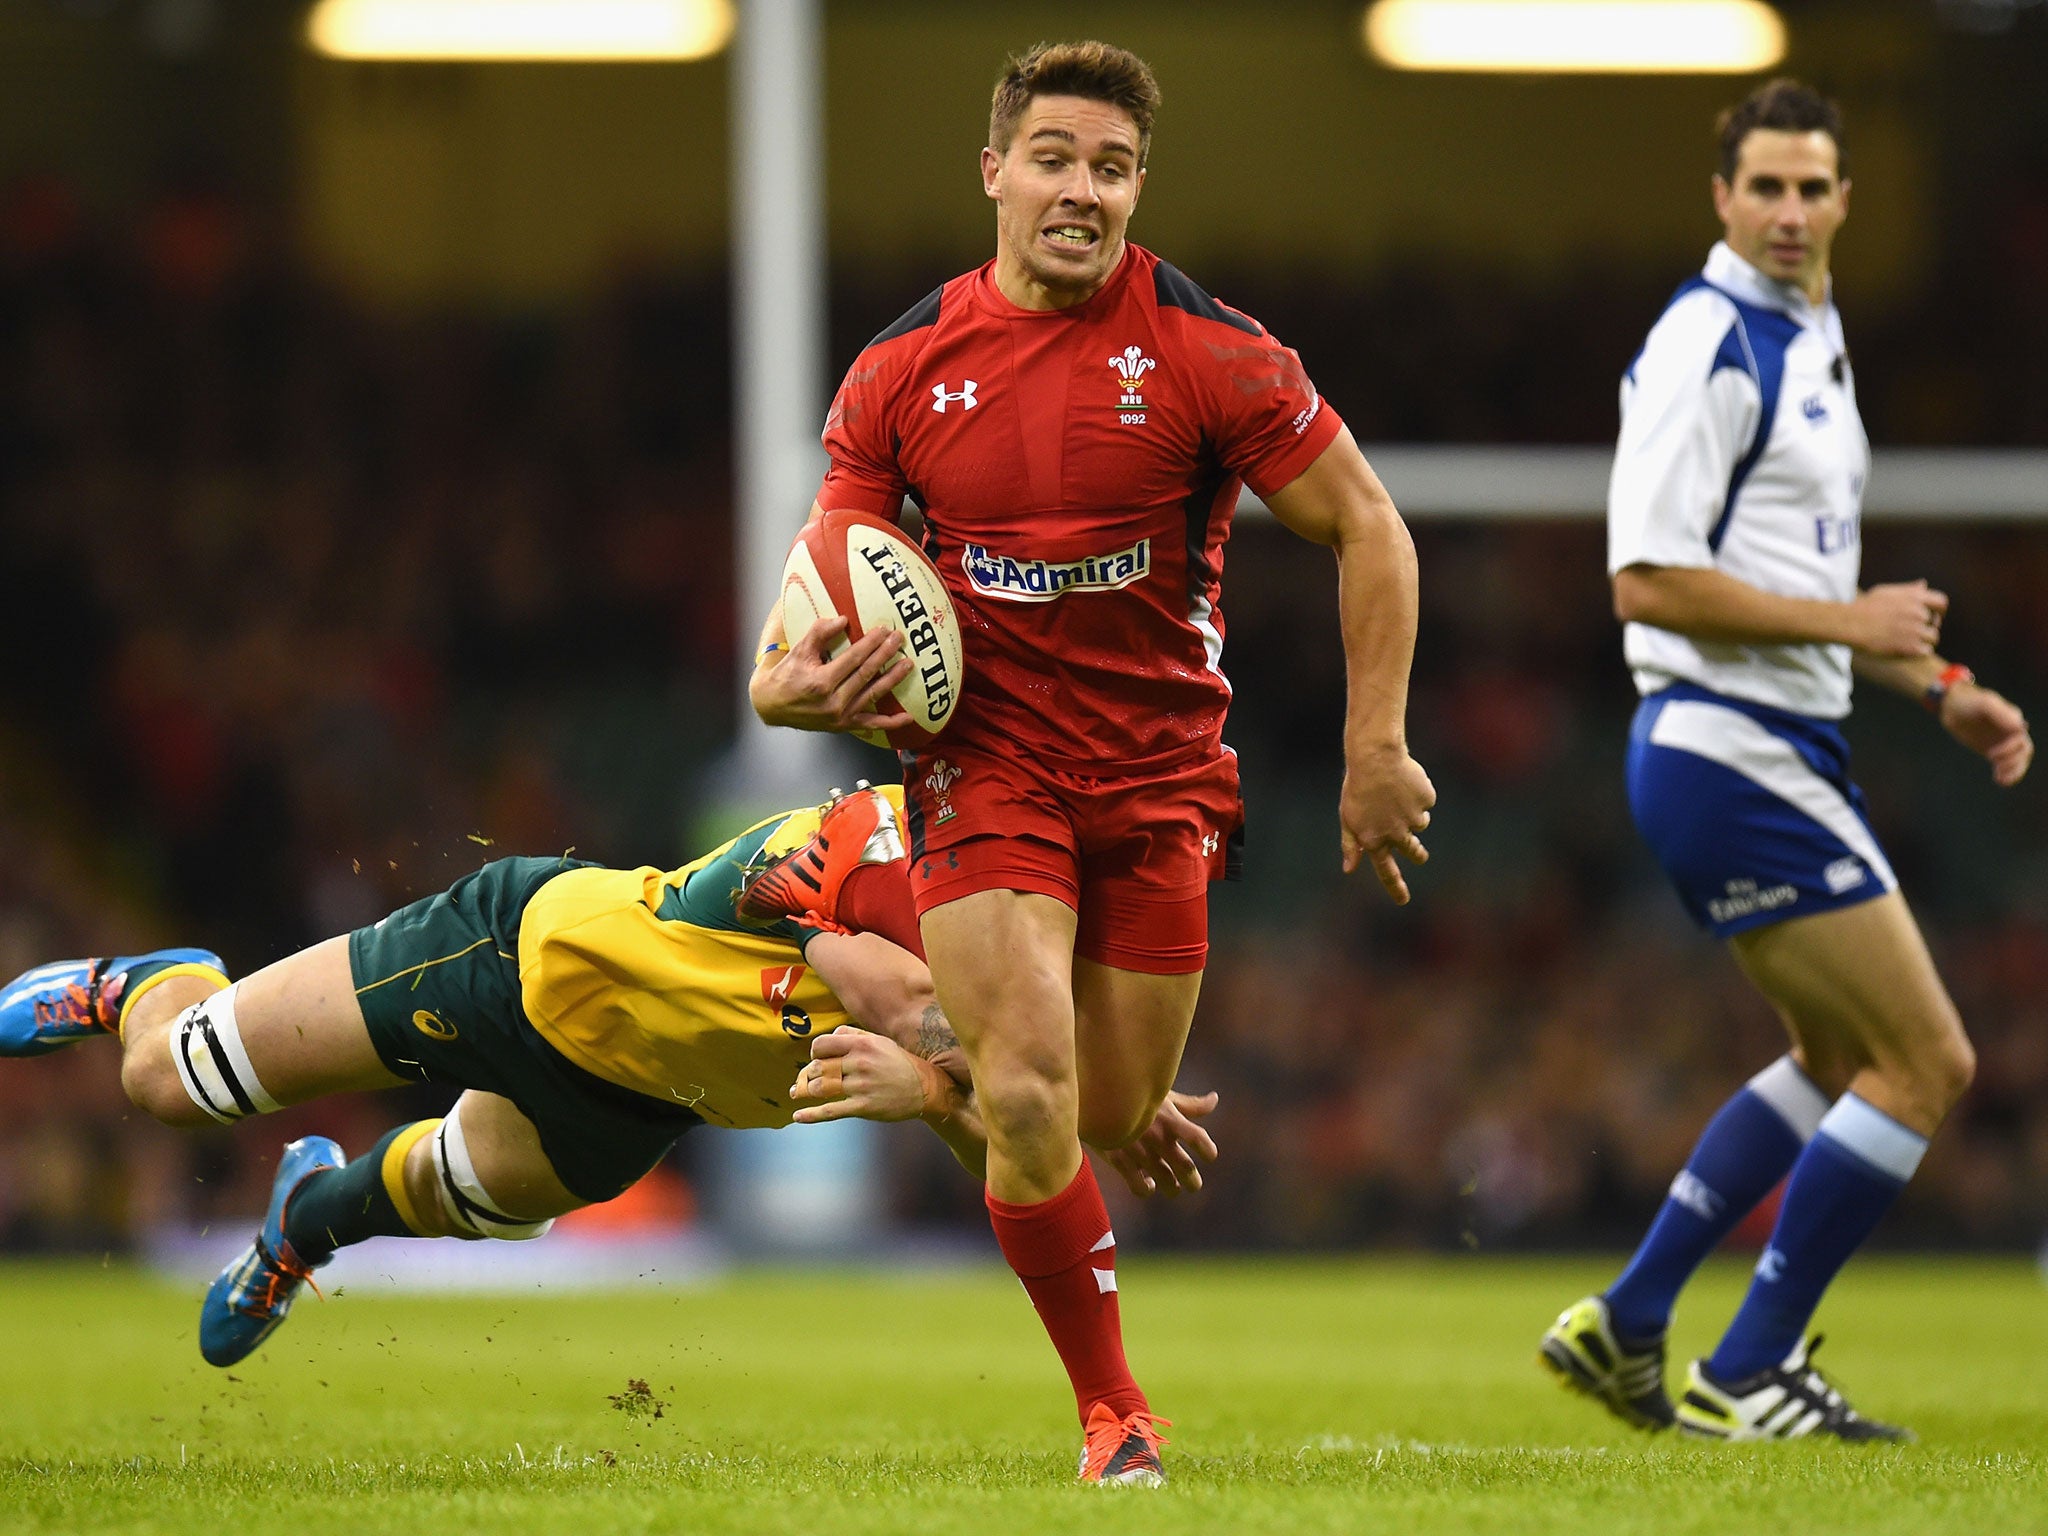 Wales scrum-half Rhys Webb returns after a six-month injury lay-off